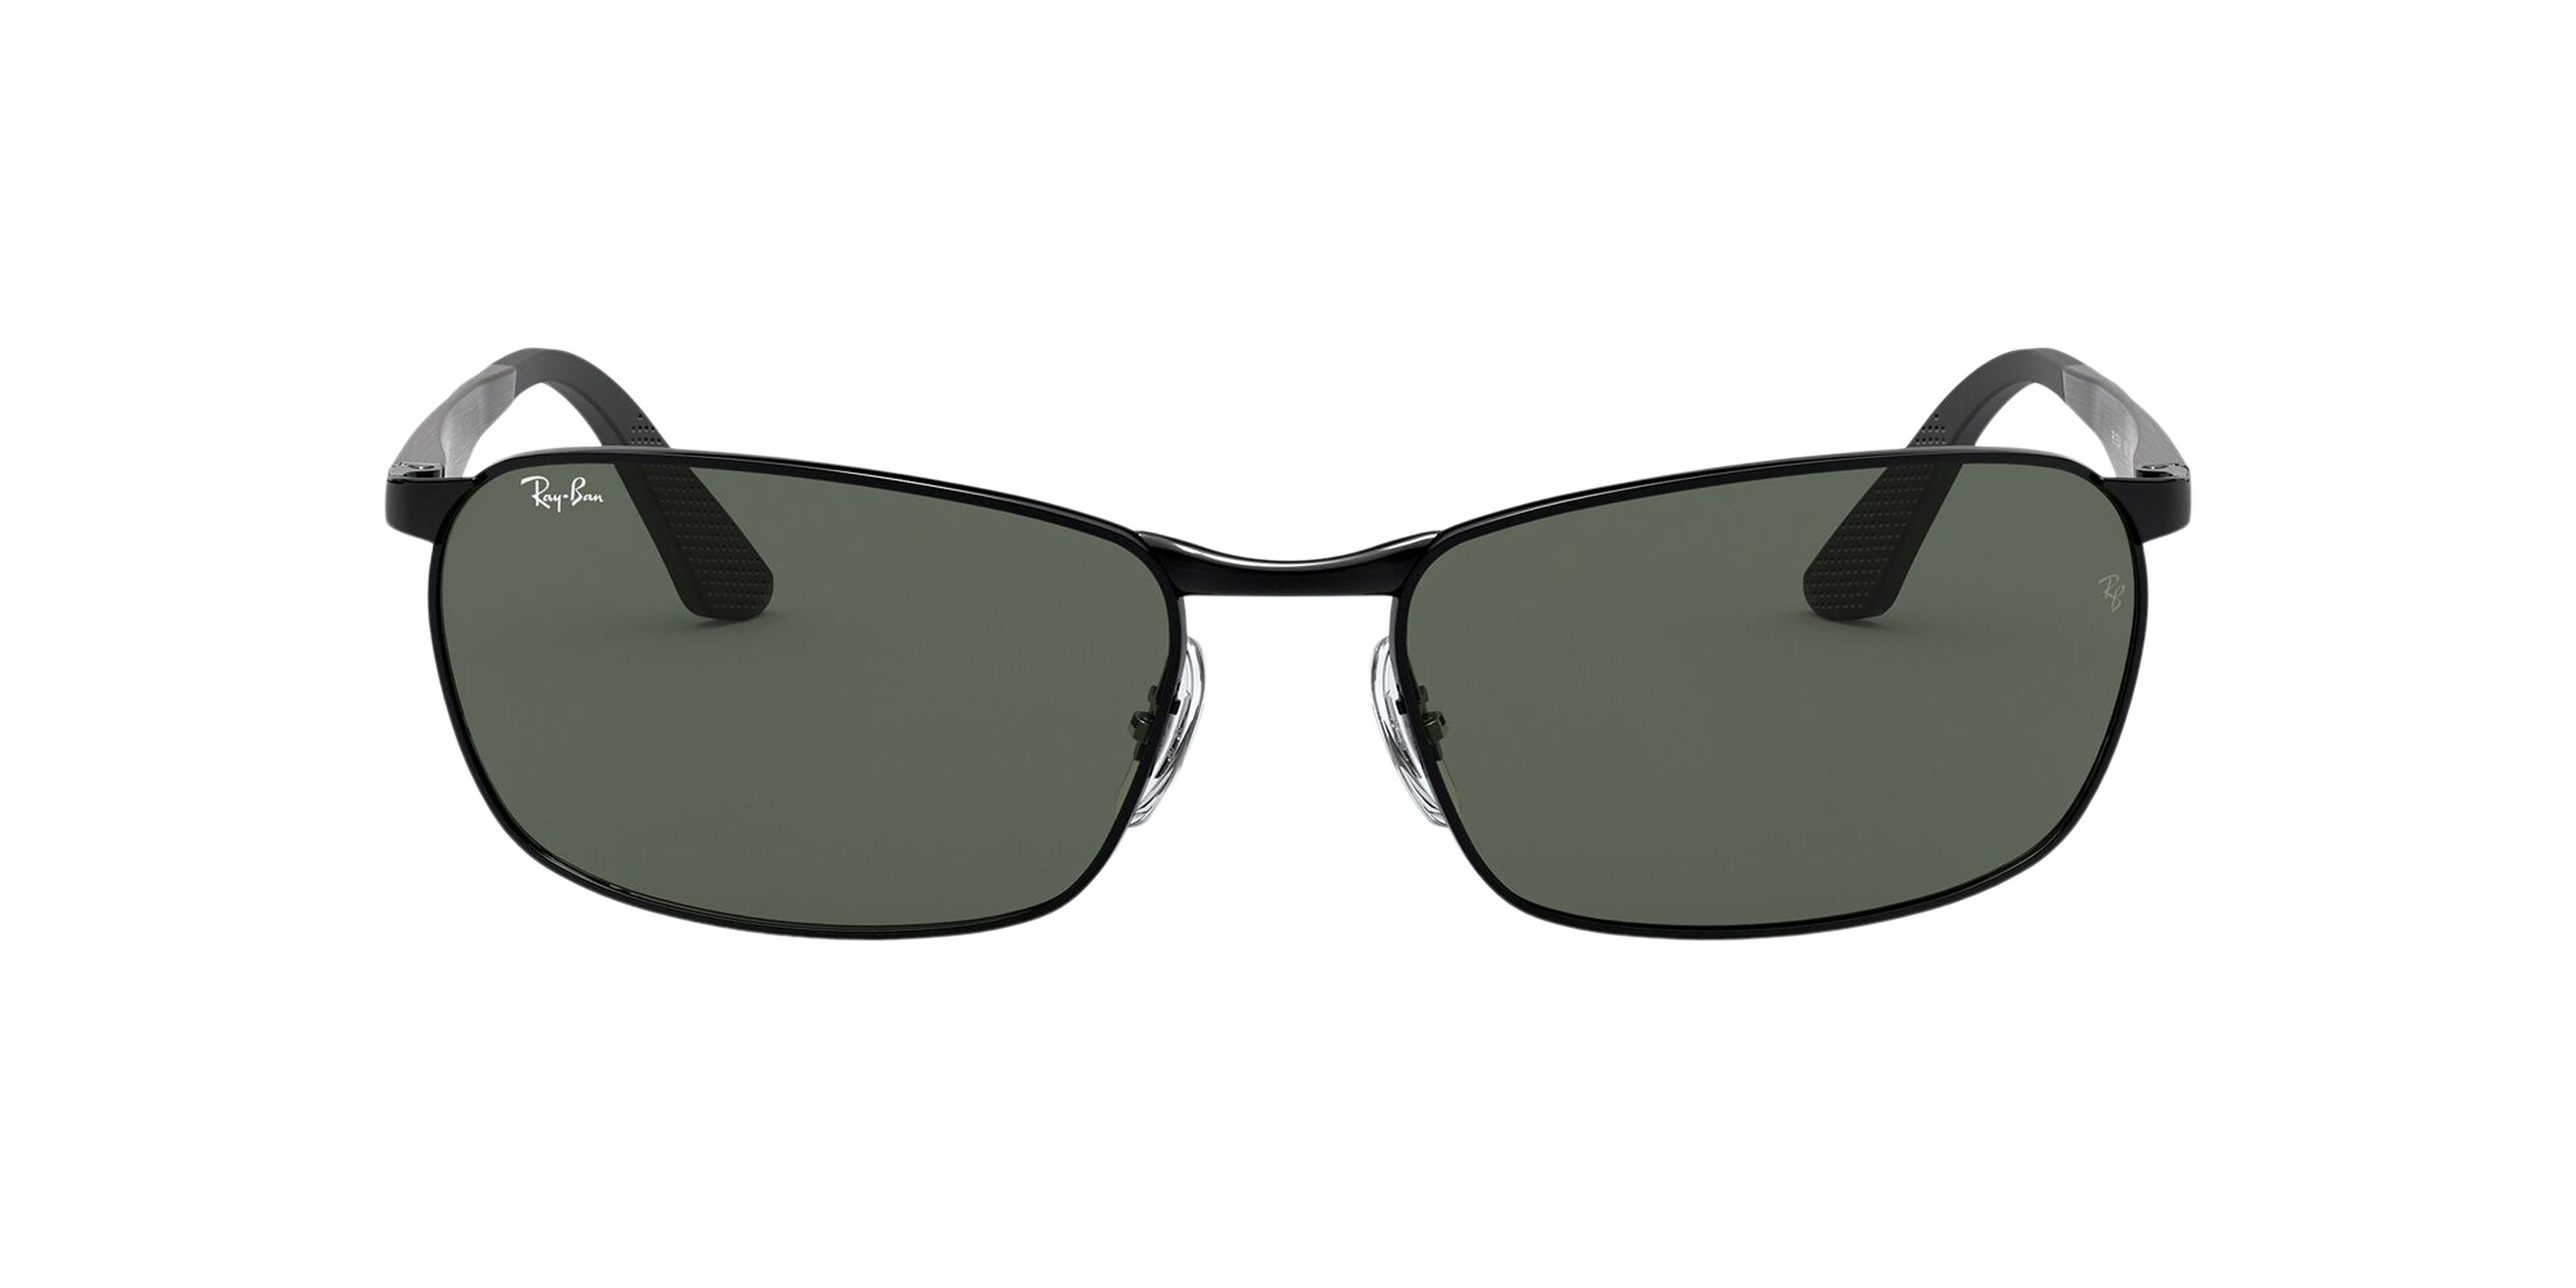 [products.image.front] RAY-BAN RB3534 2